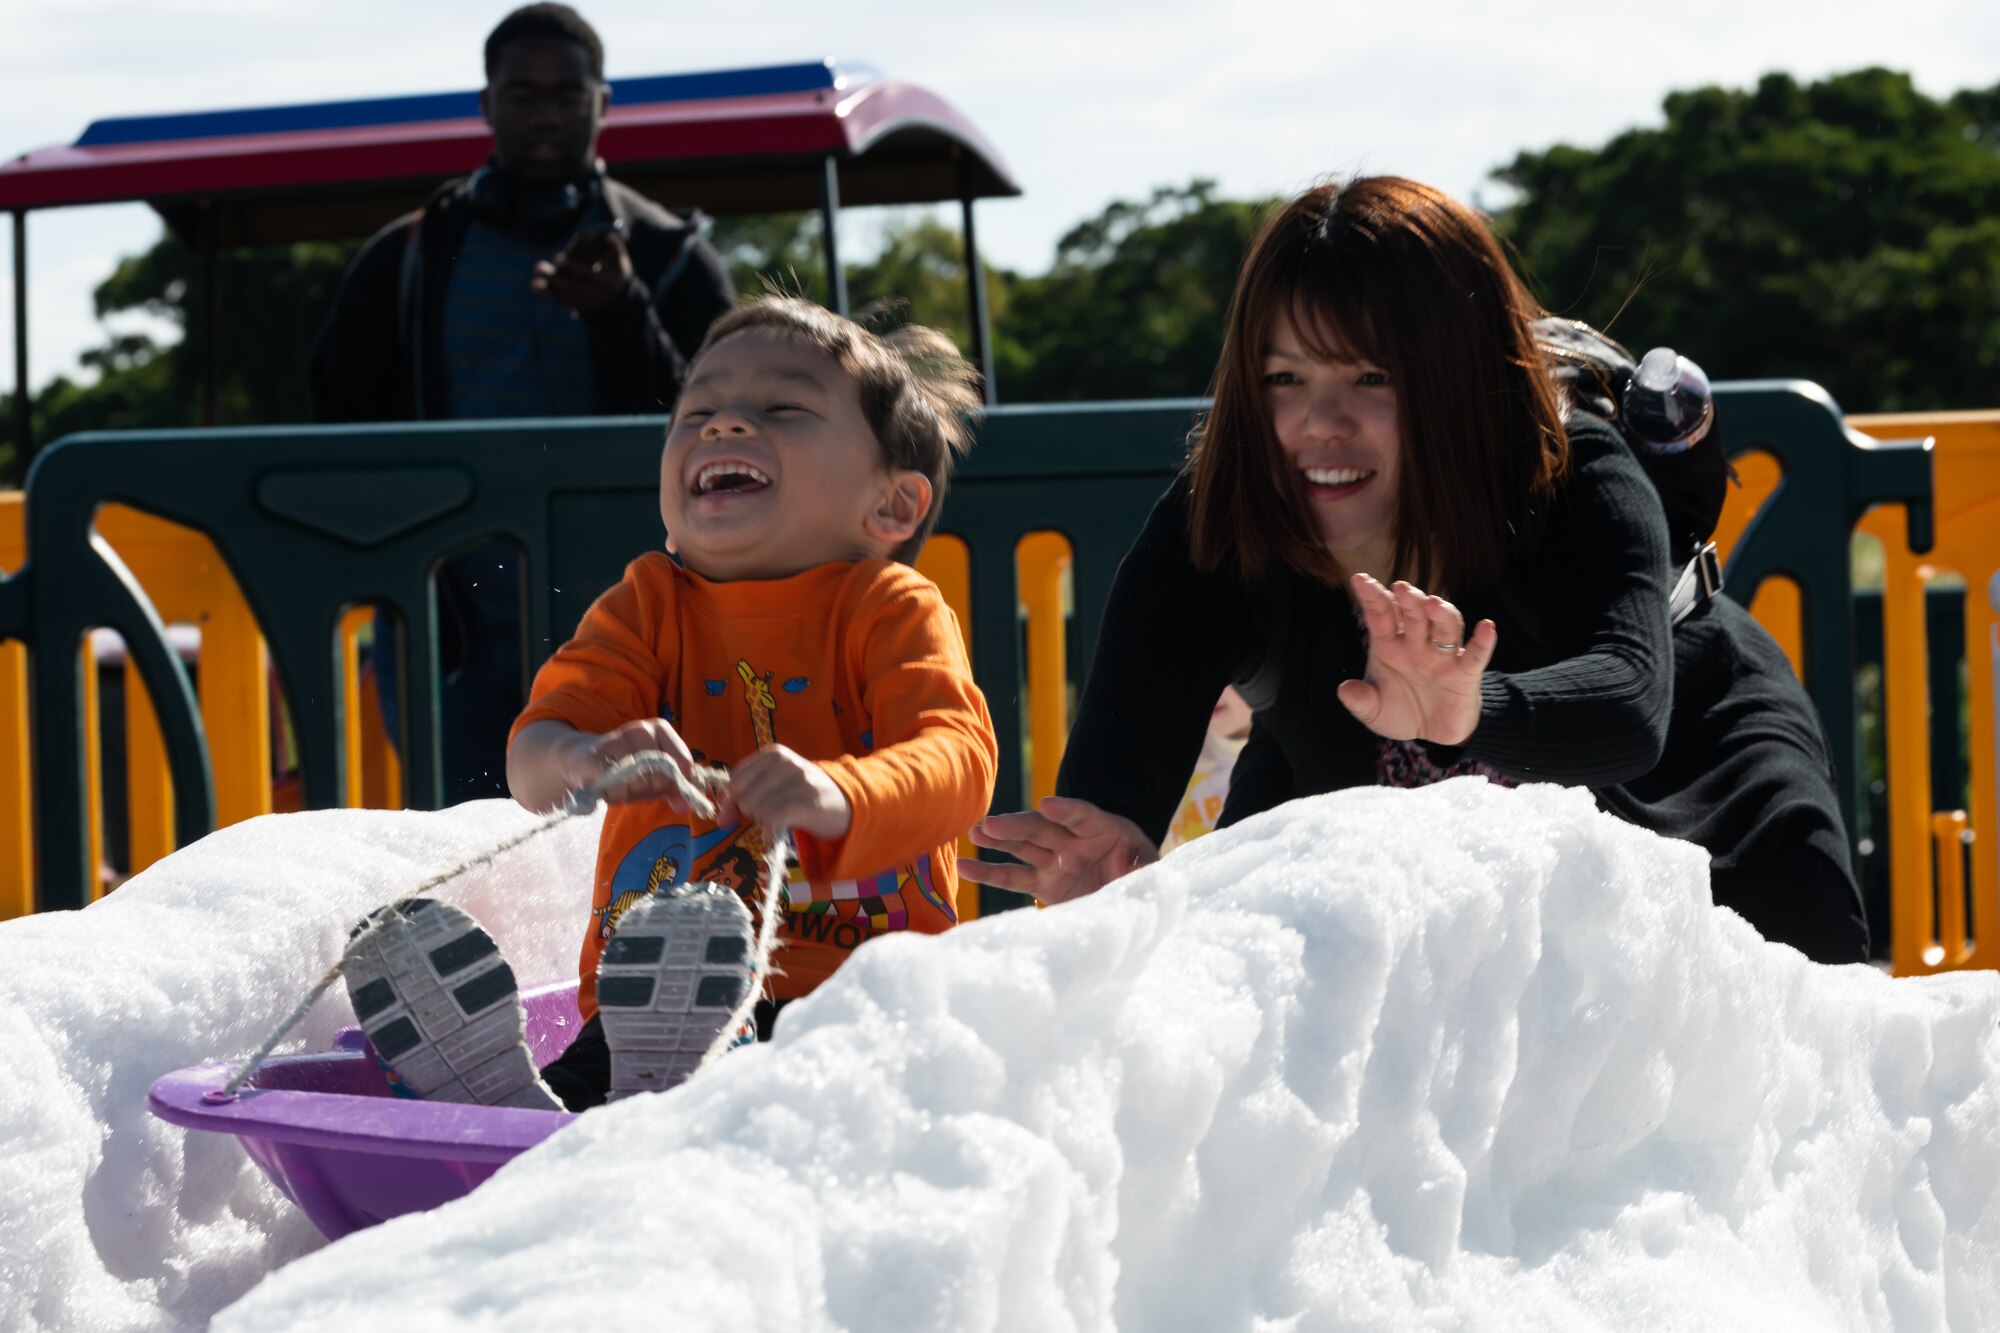 A woman pushes a child on a snow sled during the 18th Wing Tinsel Town event at Kadena Air Base, Japan, Dec. 14, 2019. Other events and games included a rock climbing wall, food trucks, and more. (U.S. Air Force photo by Senior Airman Matthew Seefeldt)